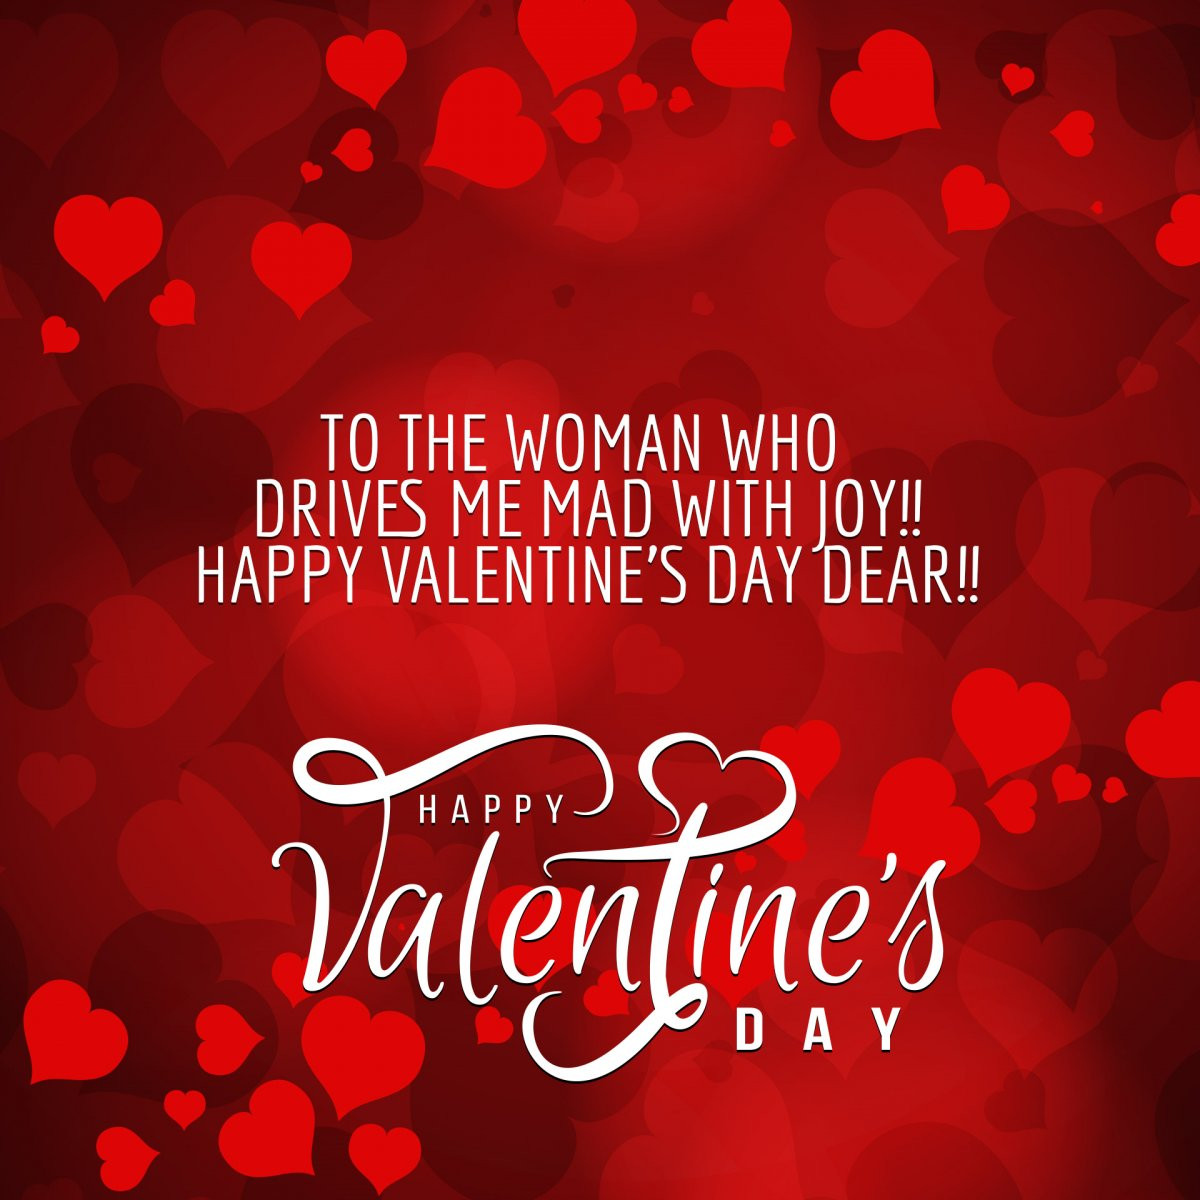 Quotes Valentines Day
 Cute Happy Valentine’s Day 2019 Wishes Messages and Love